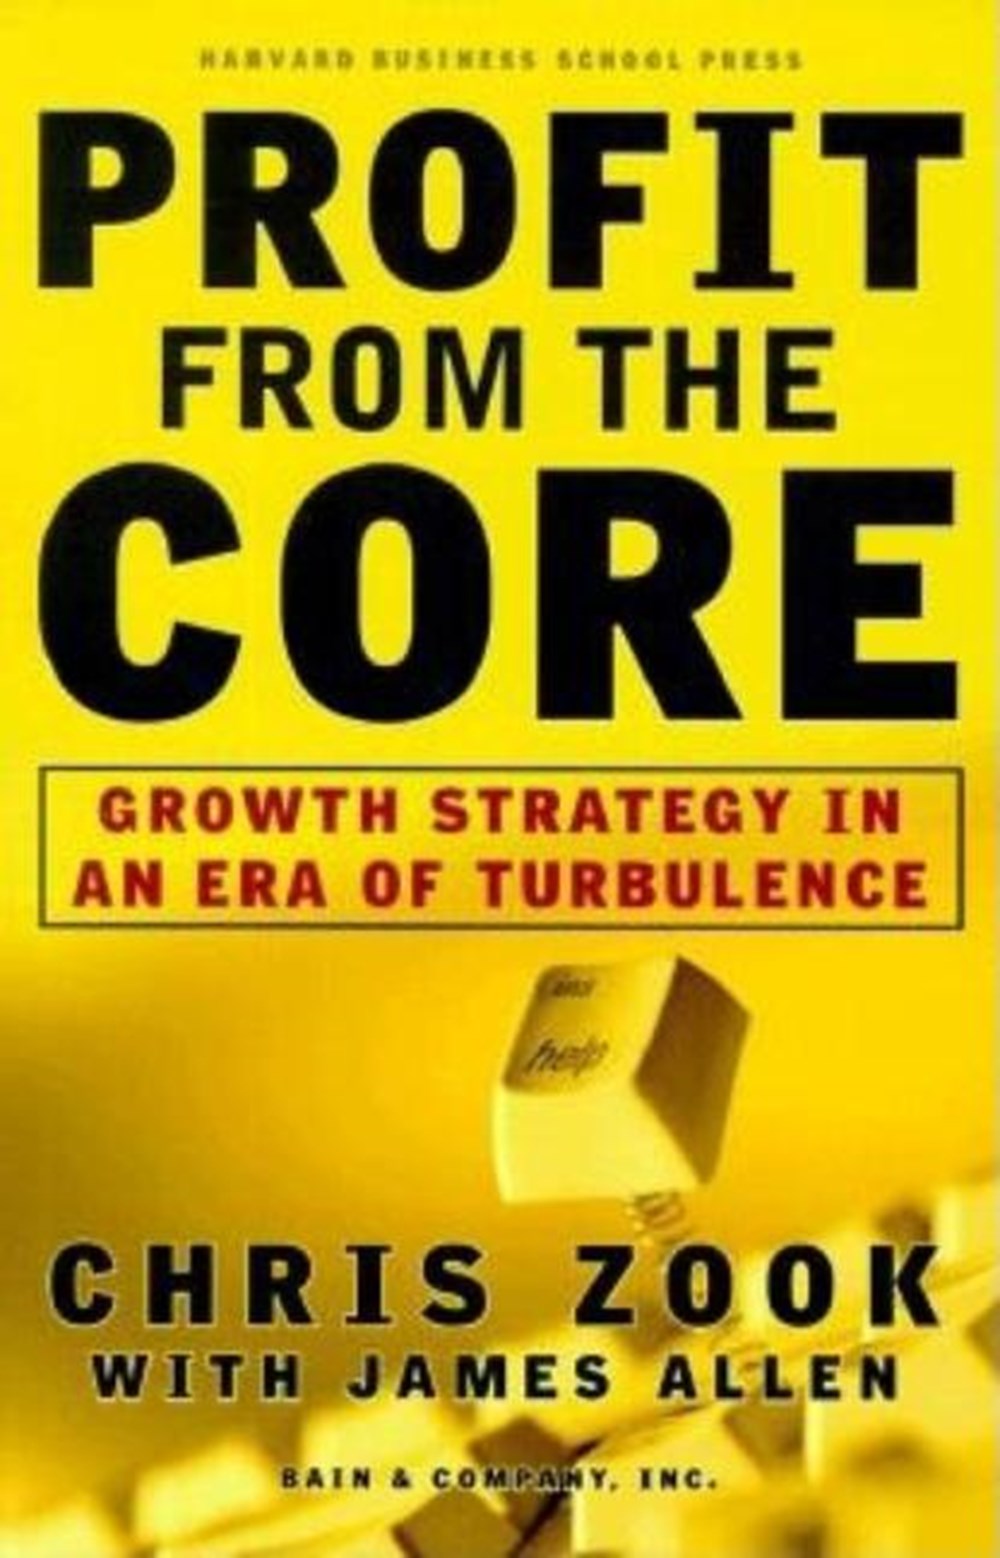 Profit from the Core Growth Strategy in an Era of Turbulence